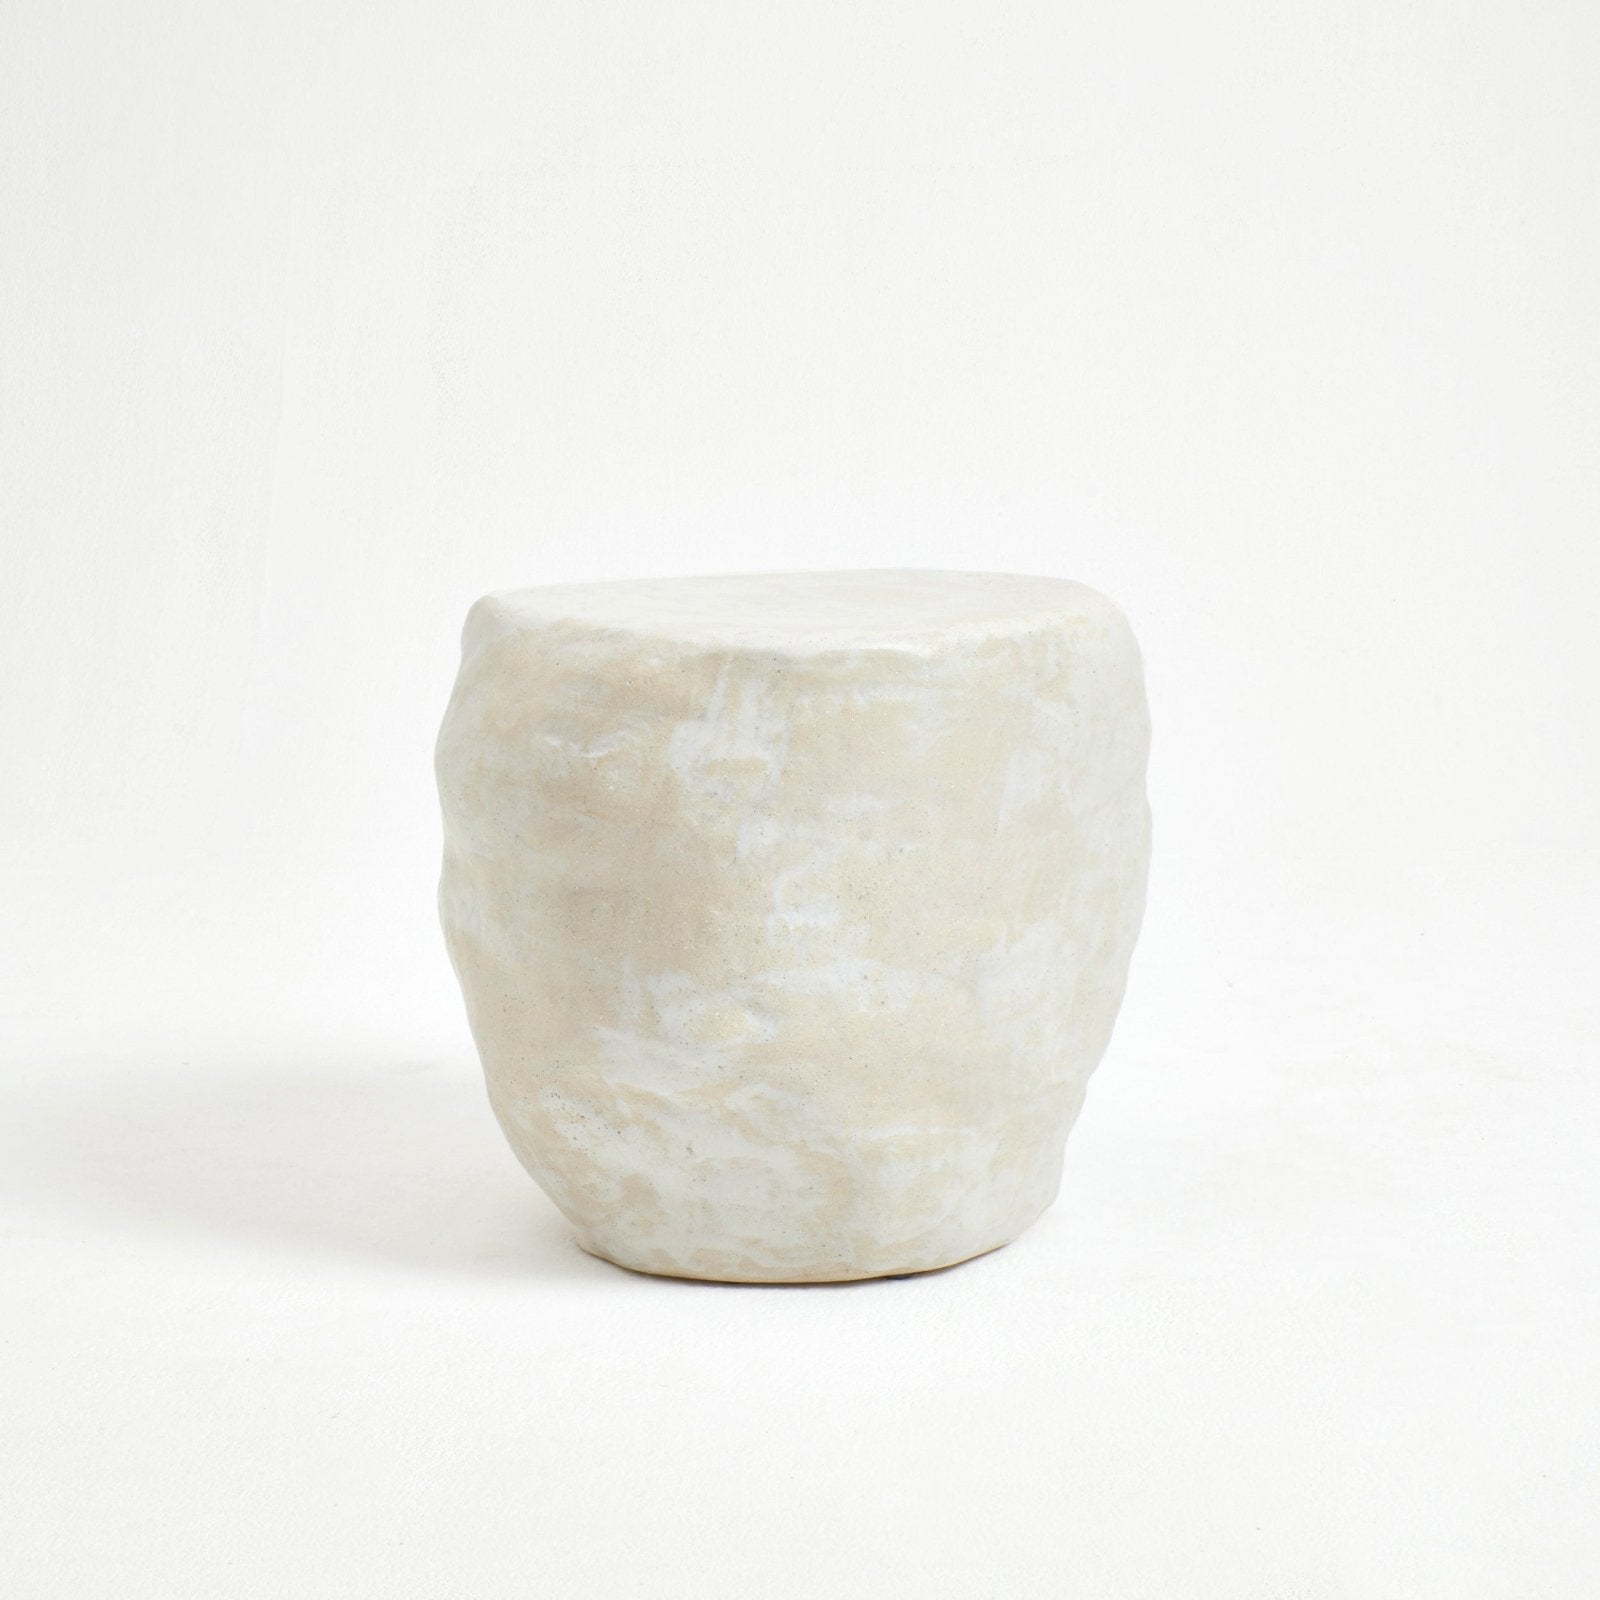 Ceramic Table Medium - Ceramic side table Tables by Project 213A